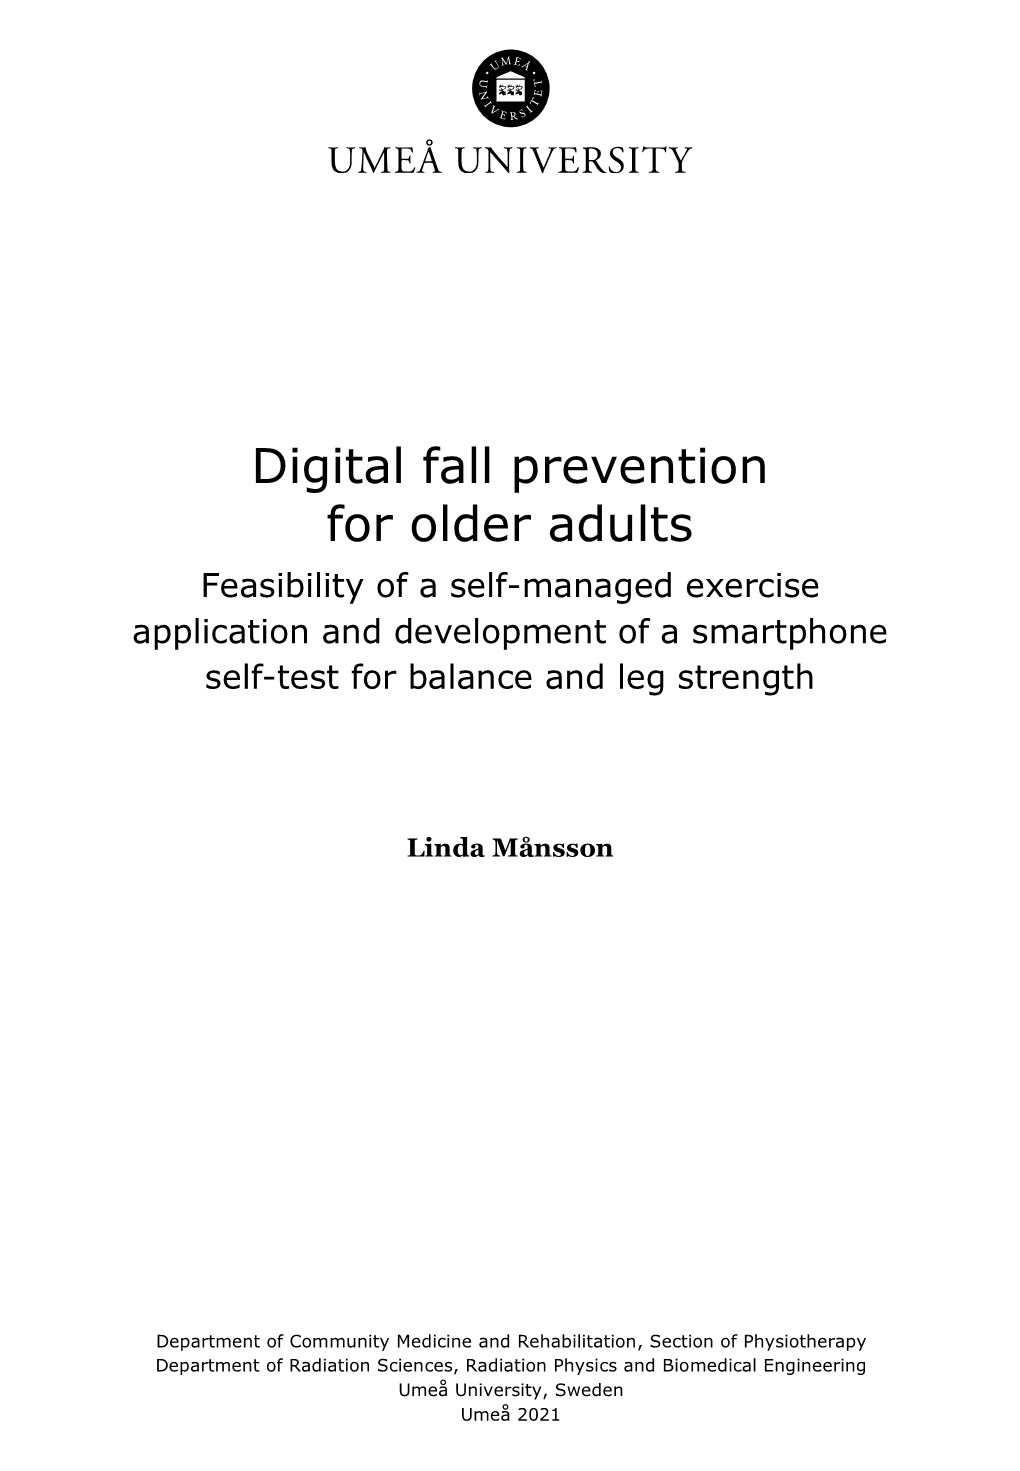 Digital Fall Prevention for Older Adults Feasibility of a Self-Managed Exercise Application and Development of a Smartphone Self-Test for Balance and Leg Strength